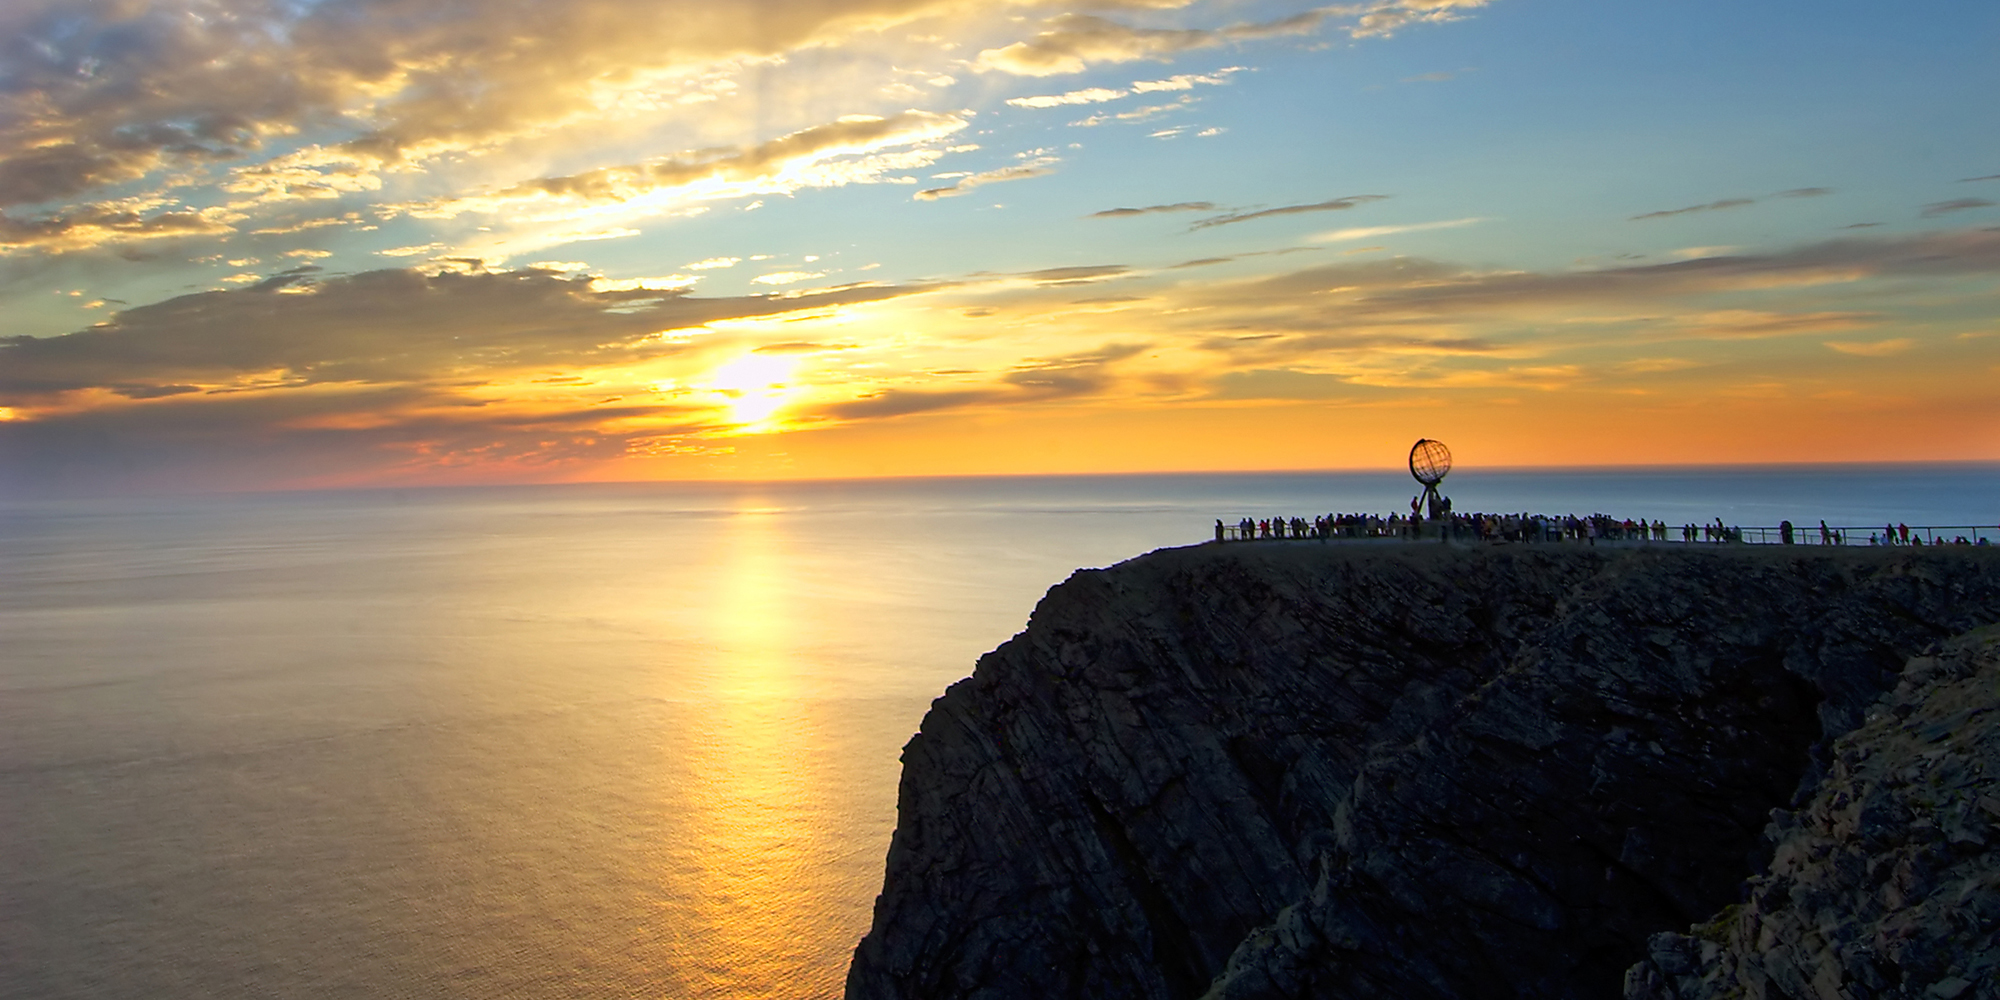 The North Cape - Official travel guide to Norway - visitnorway.com